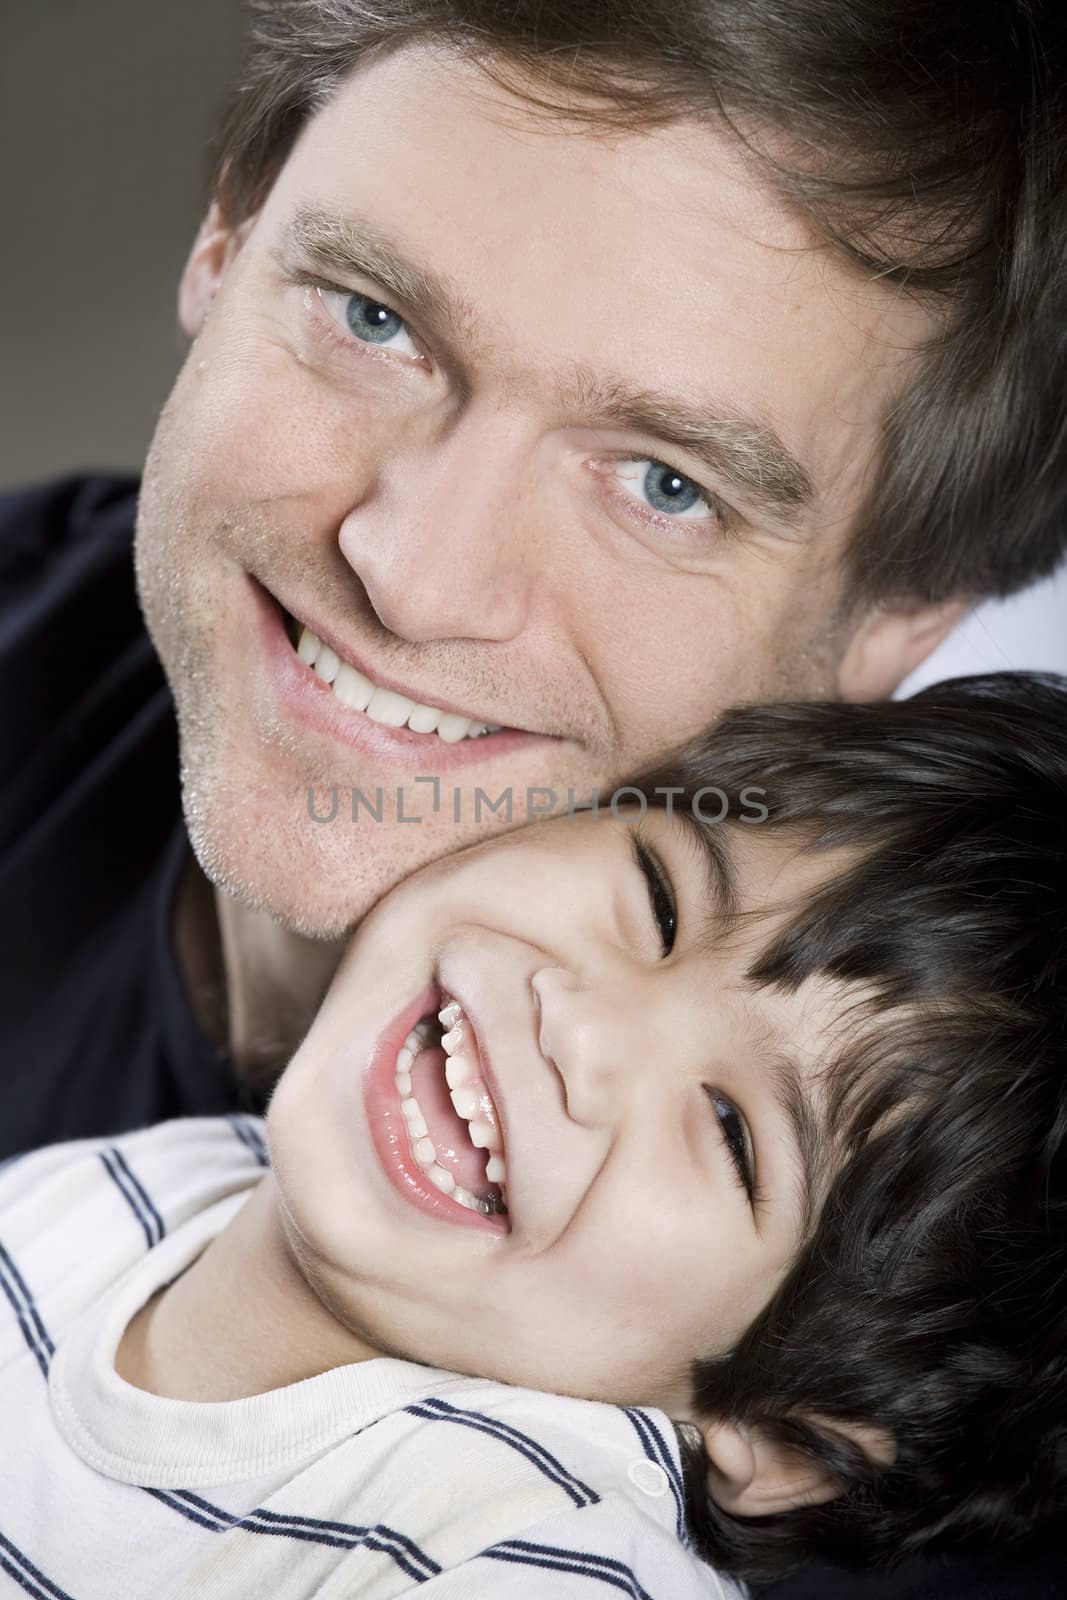 Father with his sonFather holding his son, smiling together